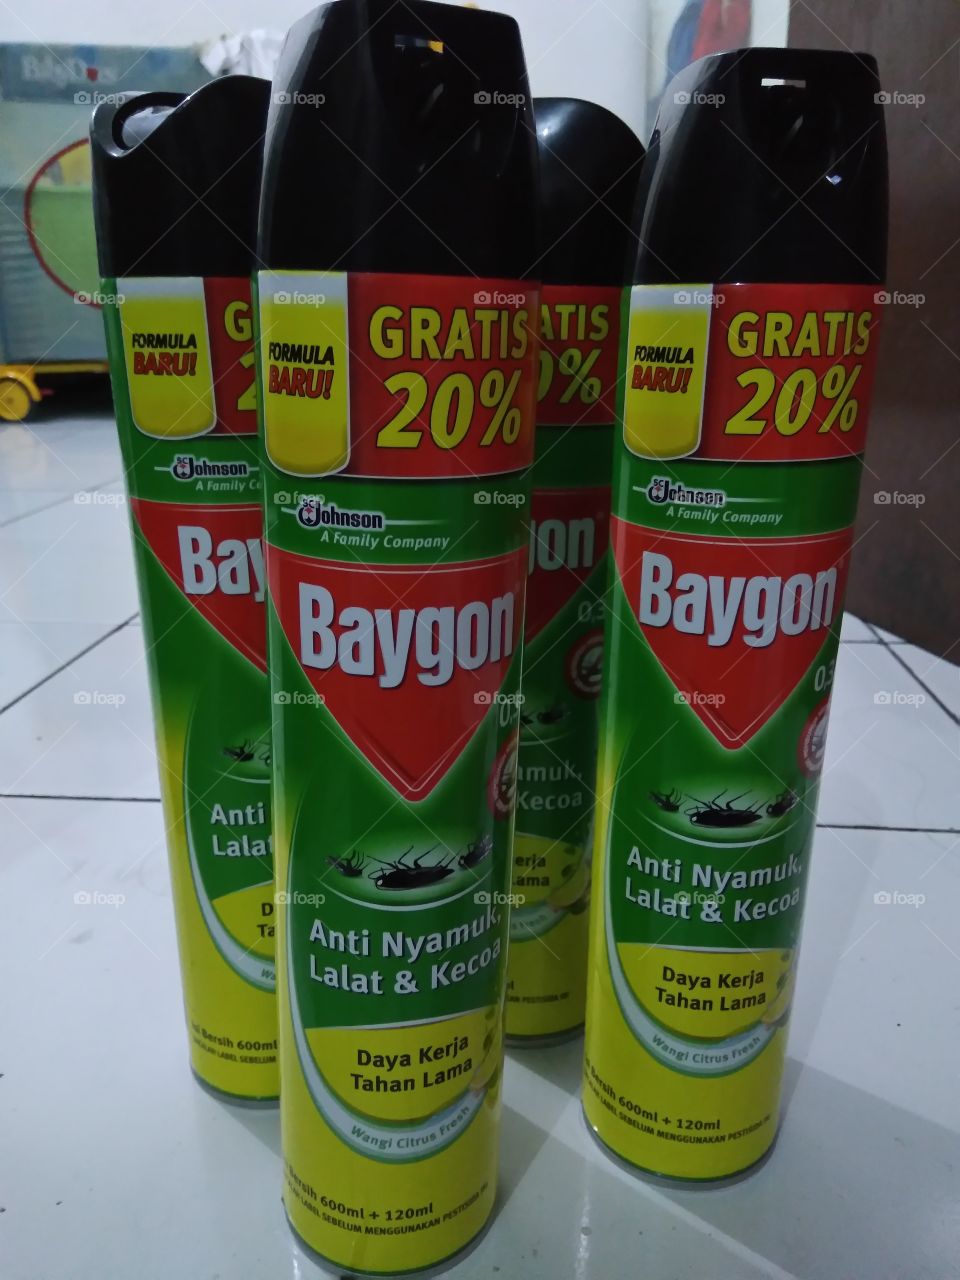 insect repellent